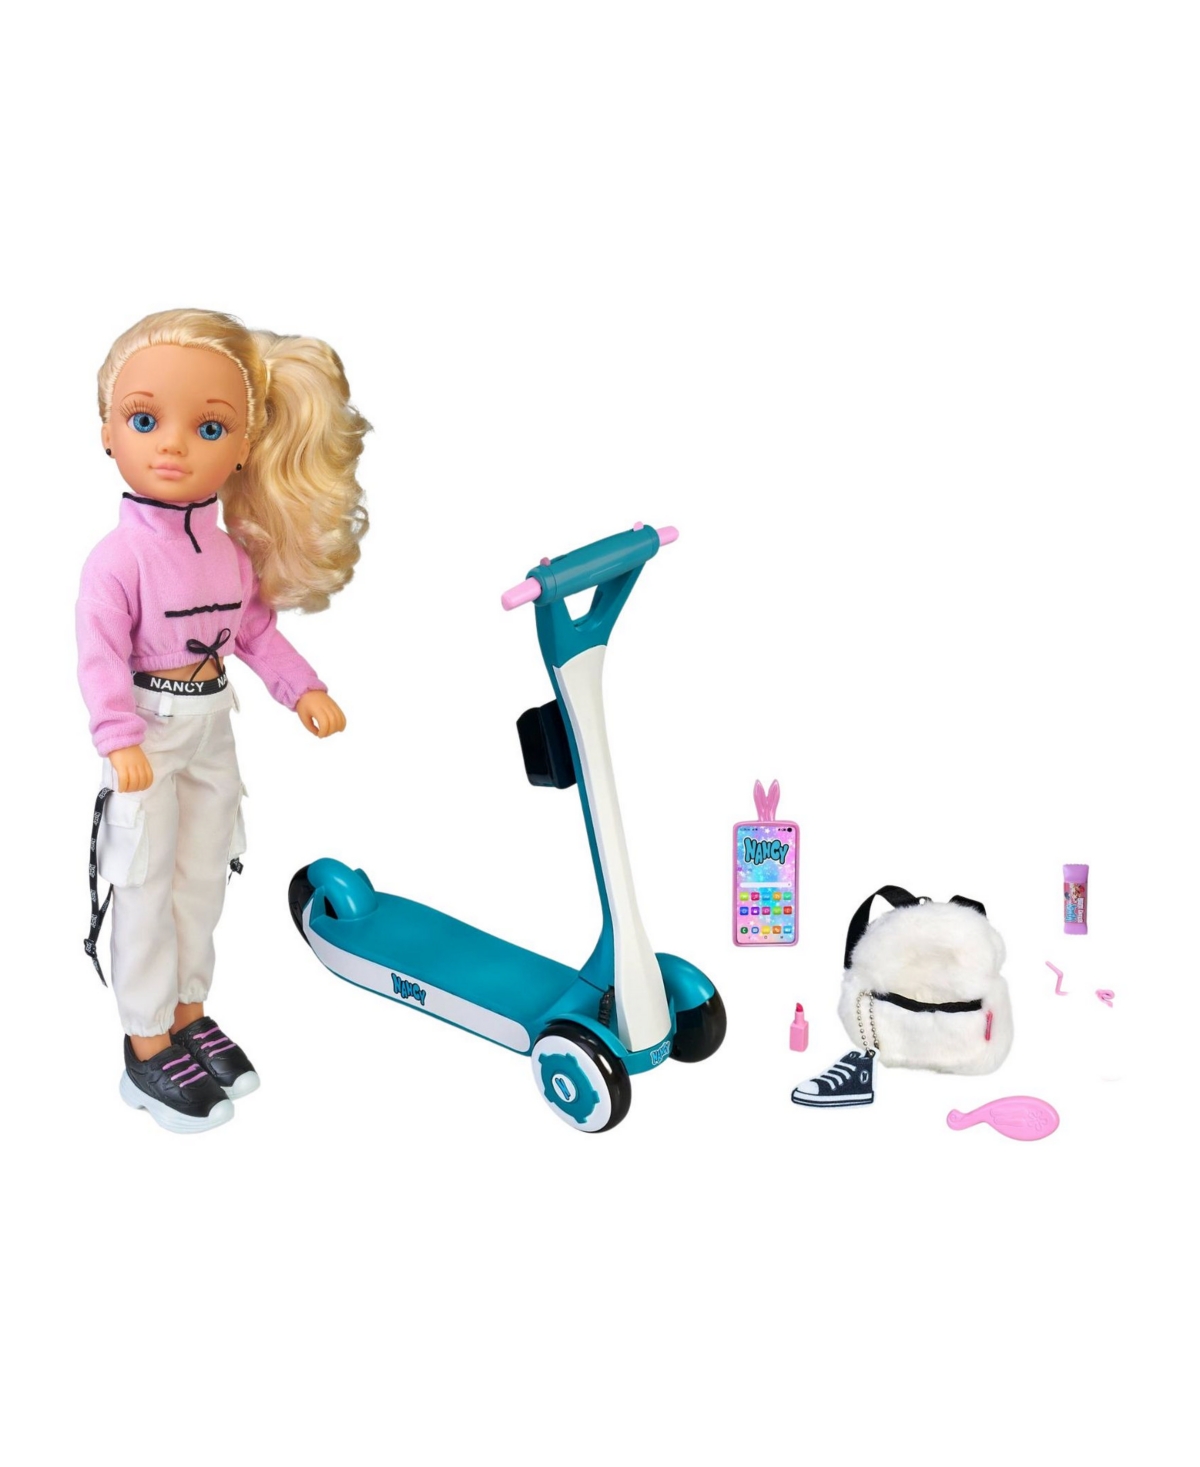 Nancy , A Day With My Scooter Doll, Ages 3 Plus For Pretend Play In Multicolor